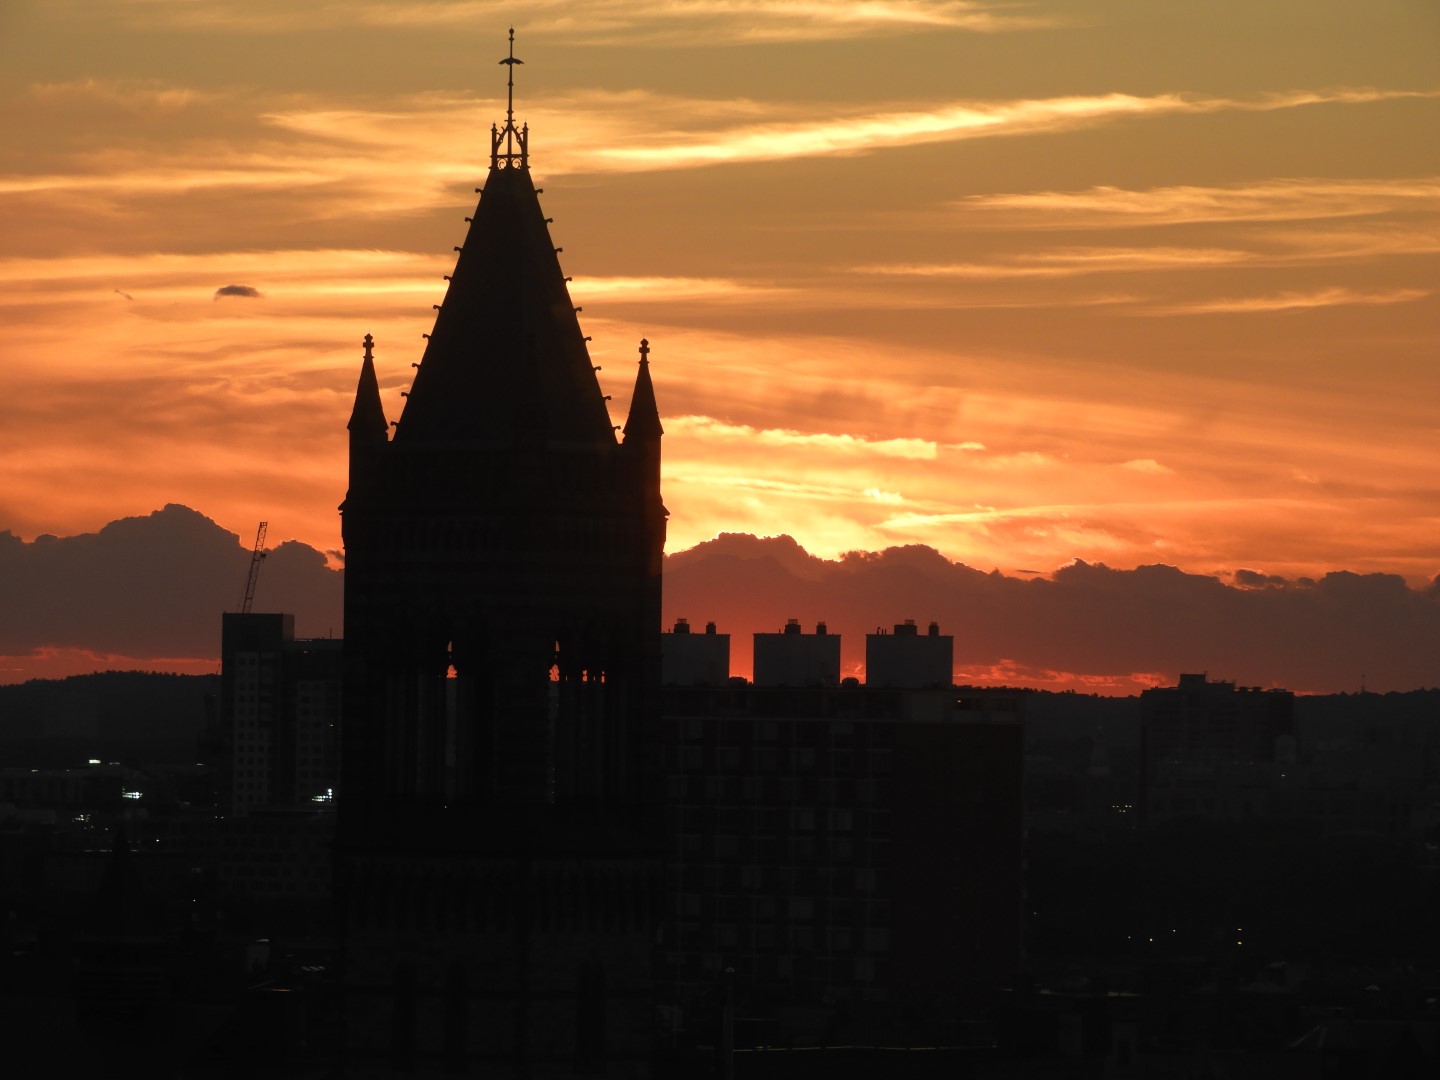 Sunset over the Boston Back Bay area